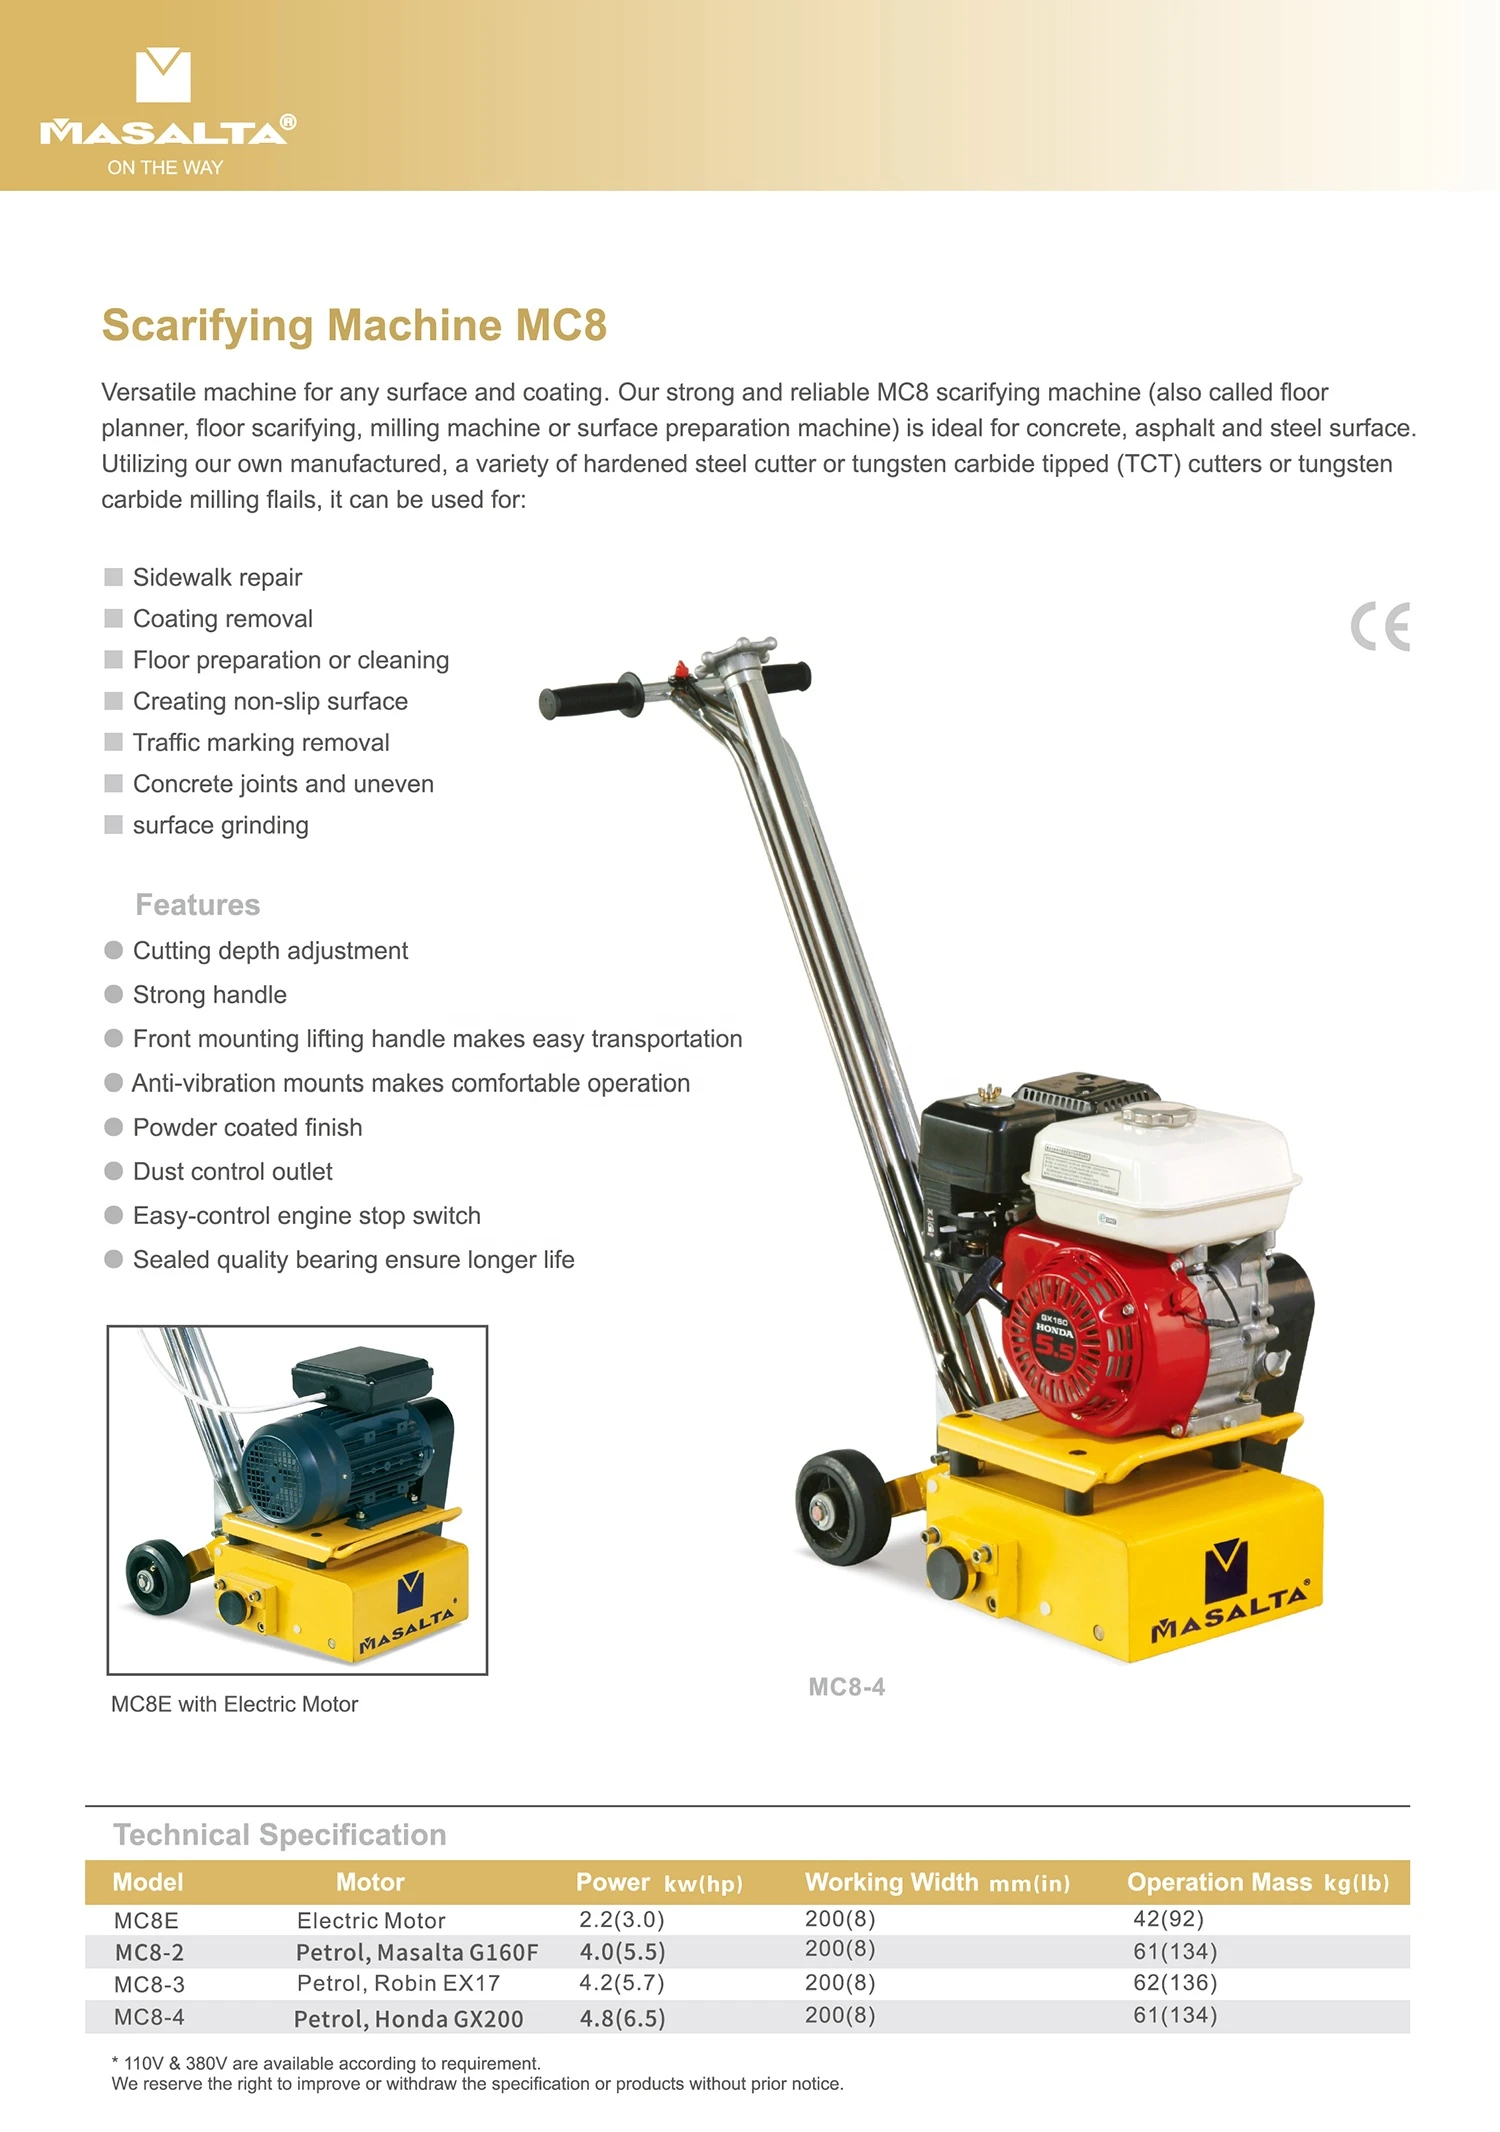 Masalta 5.0HP Road Surface Grinding Scarifying Concrete Joints and Uneven Machine MC8-3R w/o drum with Robin EY20